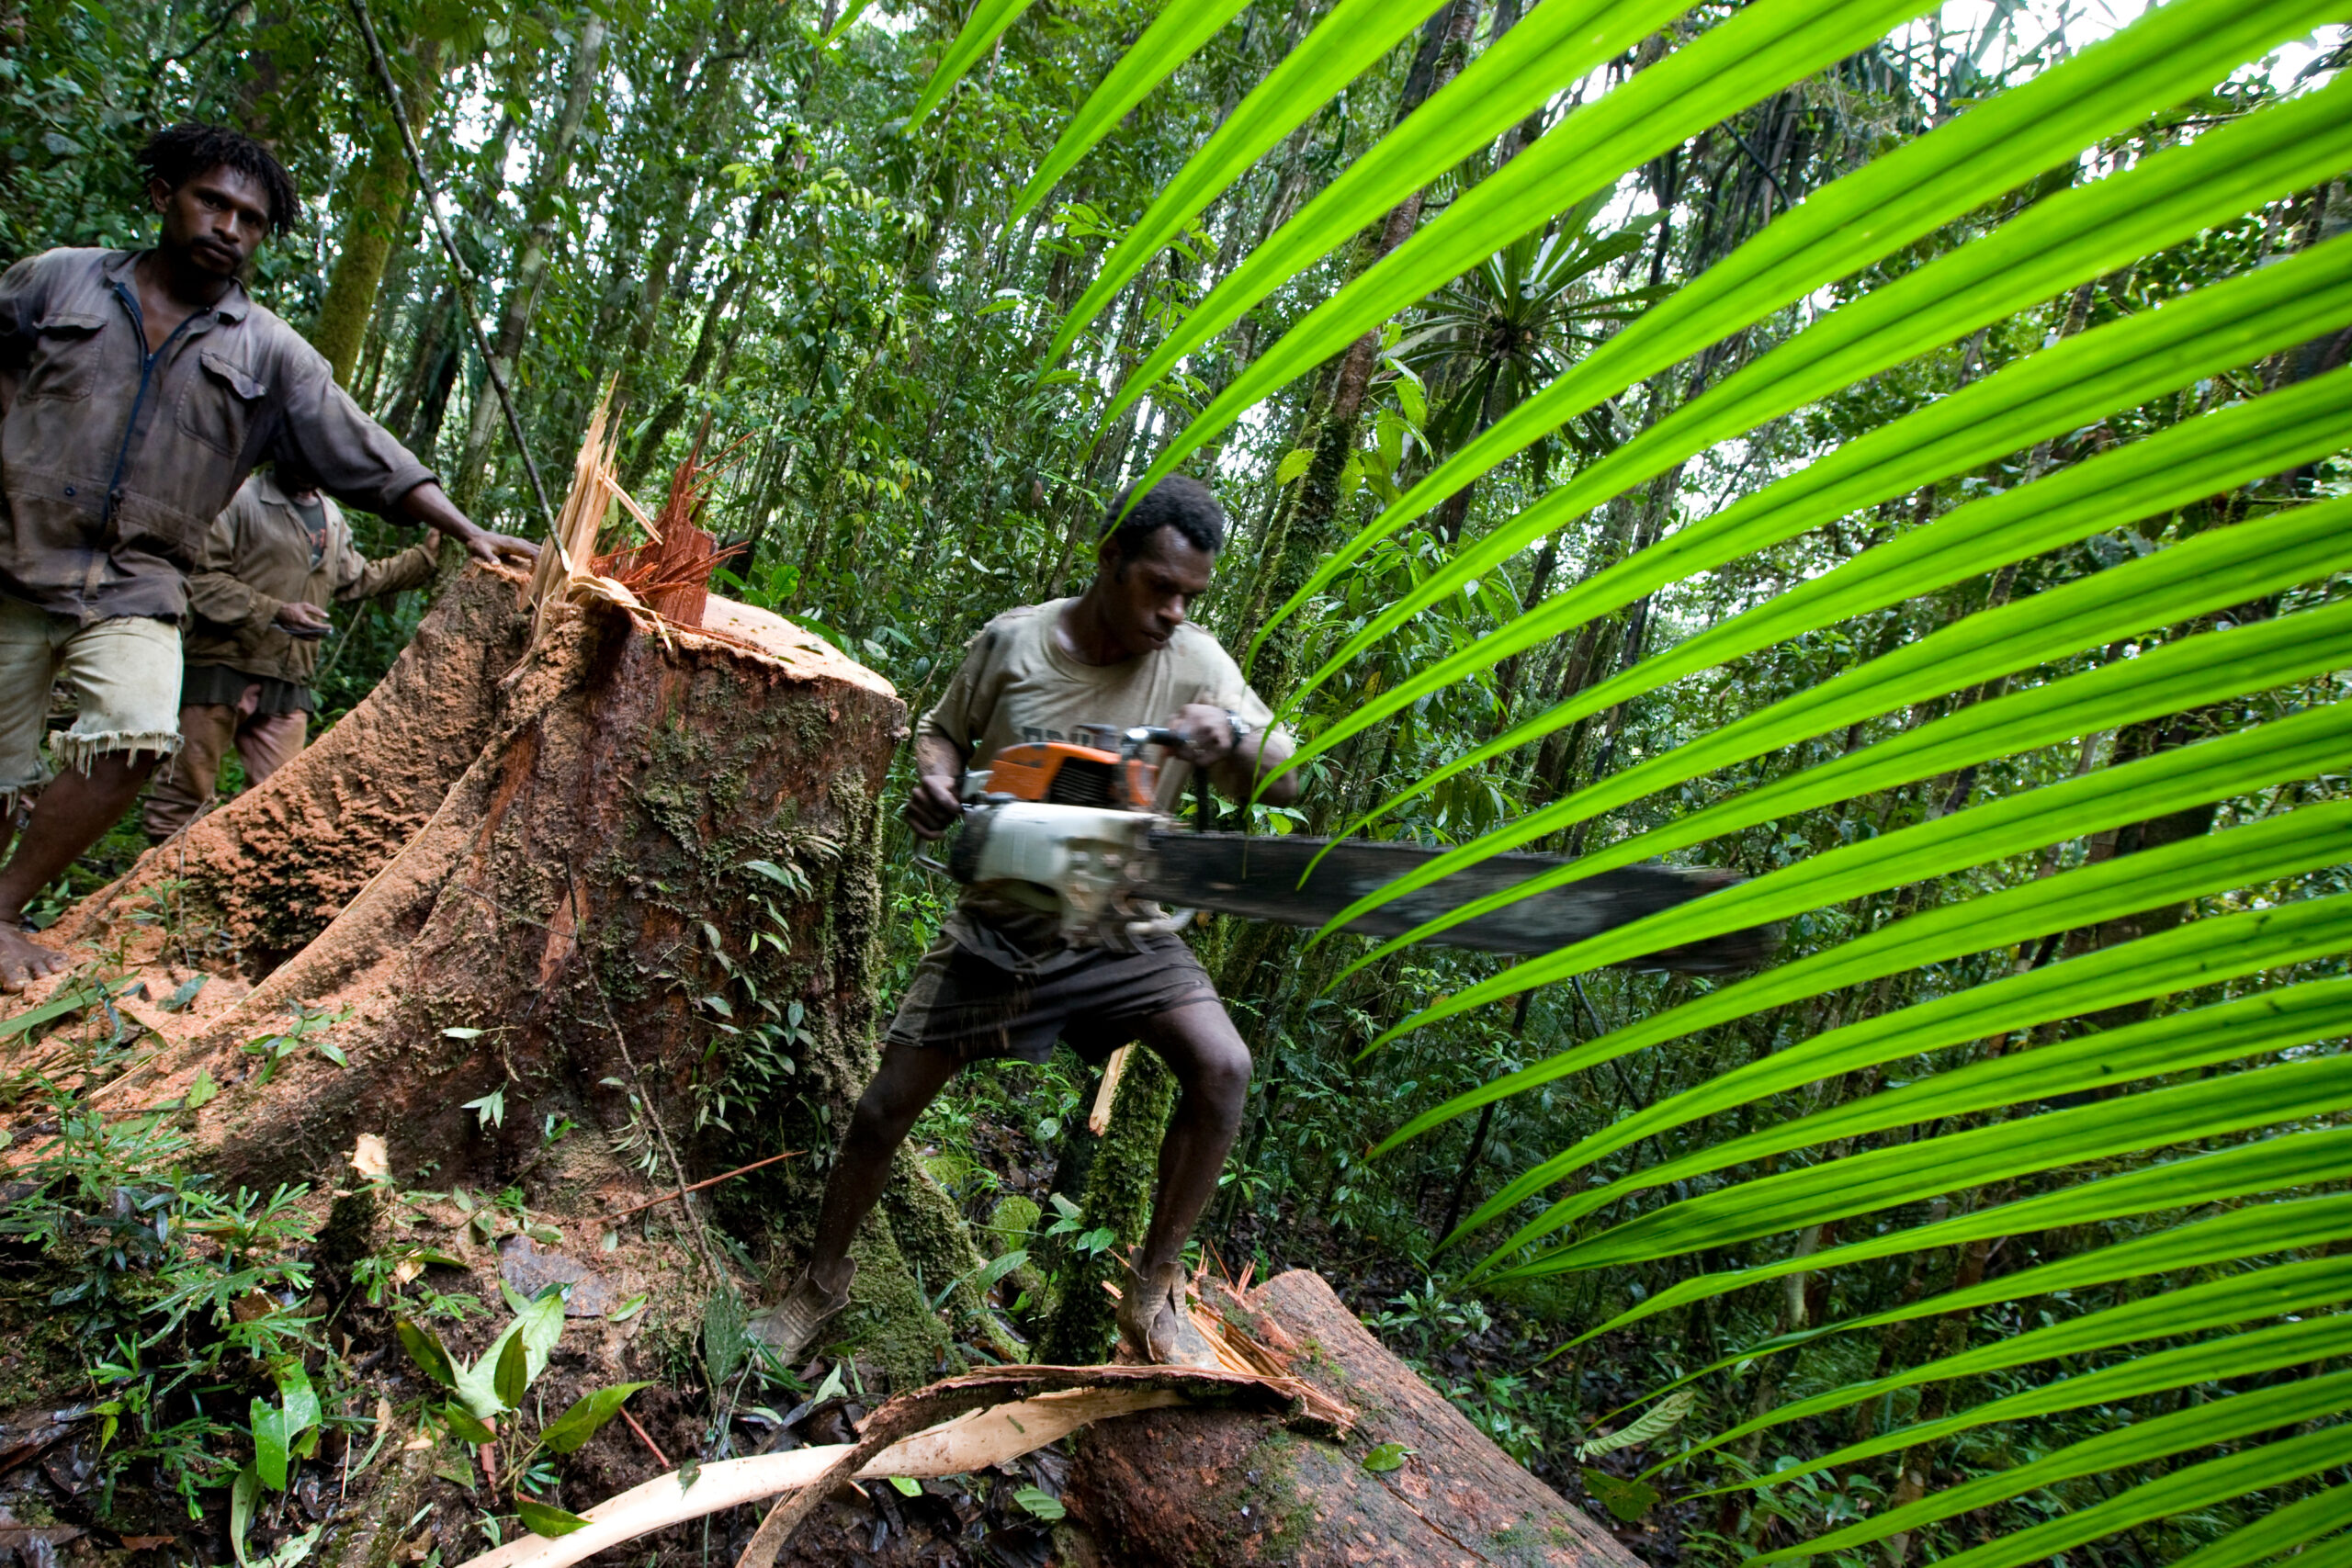 Jeremy Sutton Hibbert People Portrait Documentary Reportage Corporate Environmental CSR Social Enterprise Lifestyle Photographer Photography Local Regional Global Scottish Scotland Edinburgh Glasgow Loggers from Turama Forest Industries cut down a tree, near Morere, in the 'Turama extension' logging concession, Gulf Province, Papua New Guinea These forests are being felled by Turama Forest Industries - a group company of Malayasian logging giant Rimbunan Hijau. Twenty percent of global greenhouse emissions annually are caused by the deforestation of natural forests worldwide Deforestation Climate Change